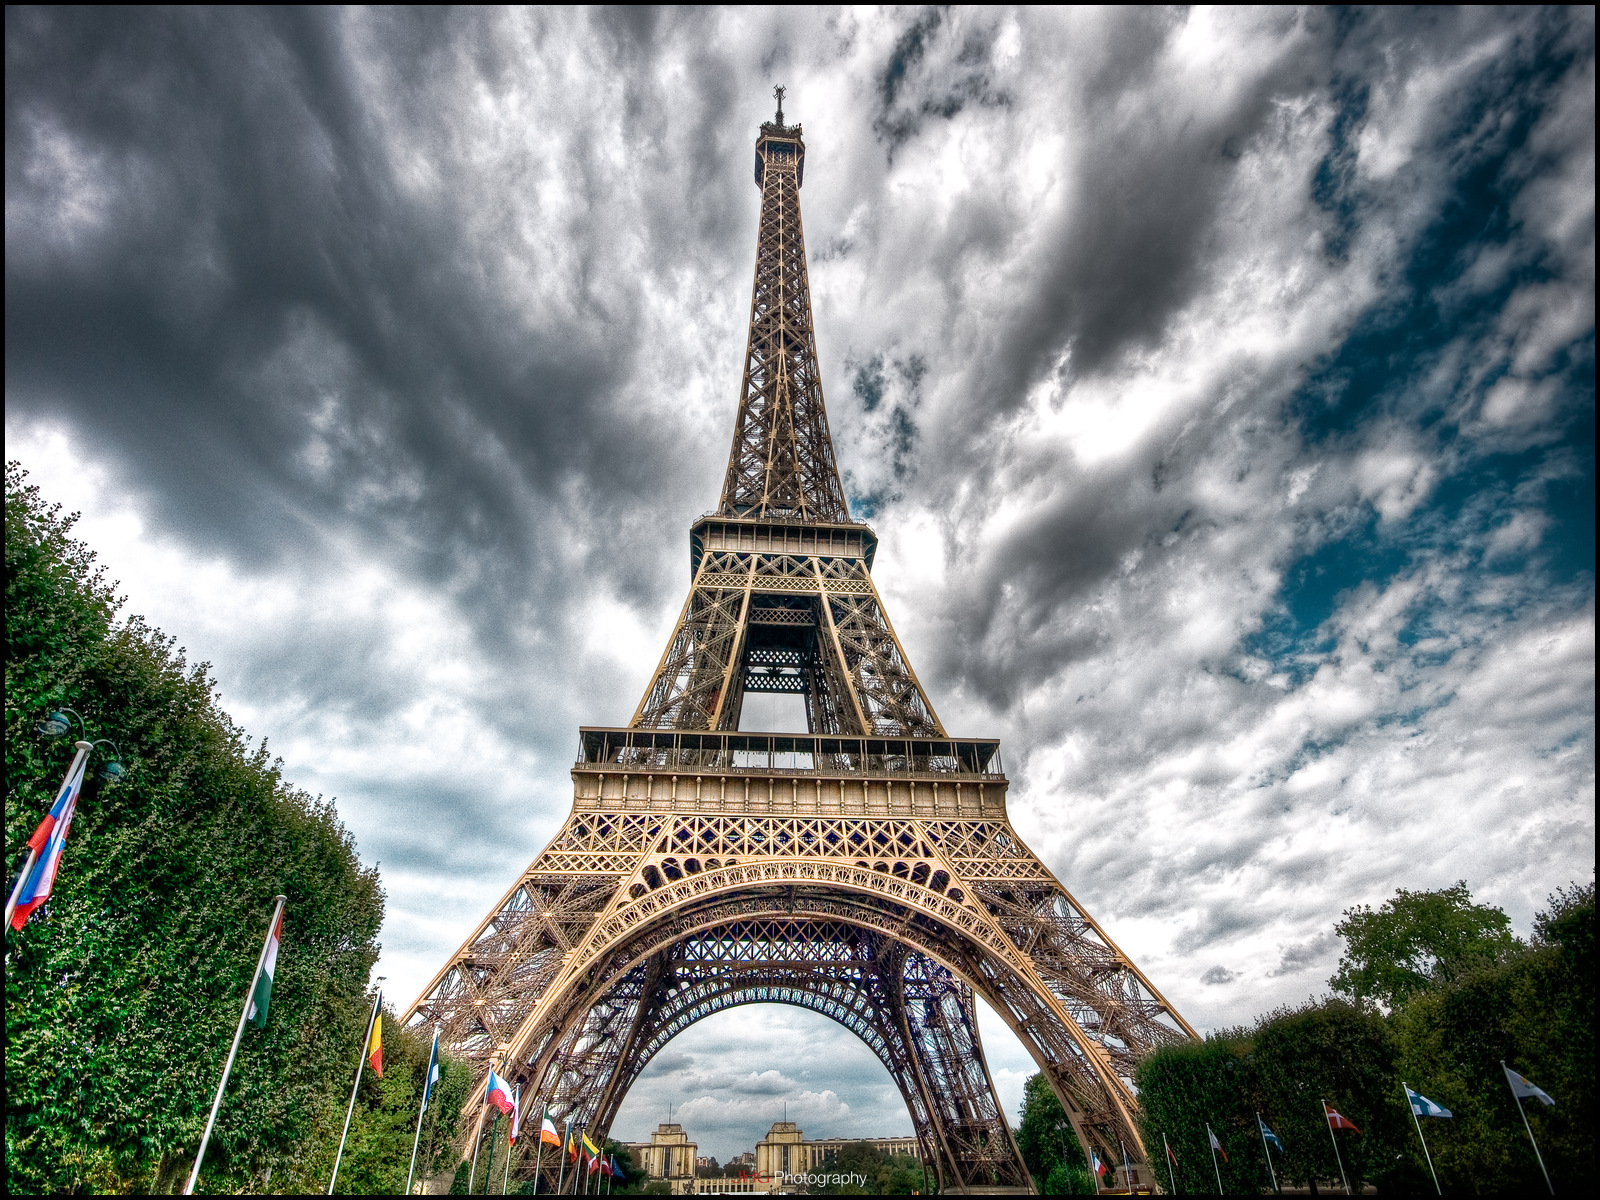 The Eiffel Tower in Paris, France: Eiffel Tower Pictures